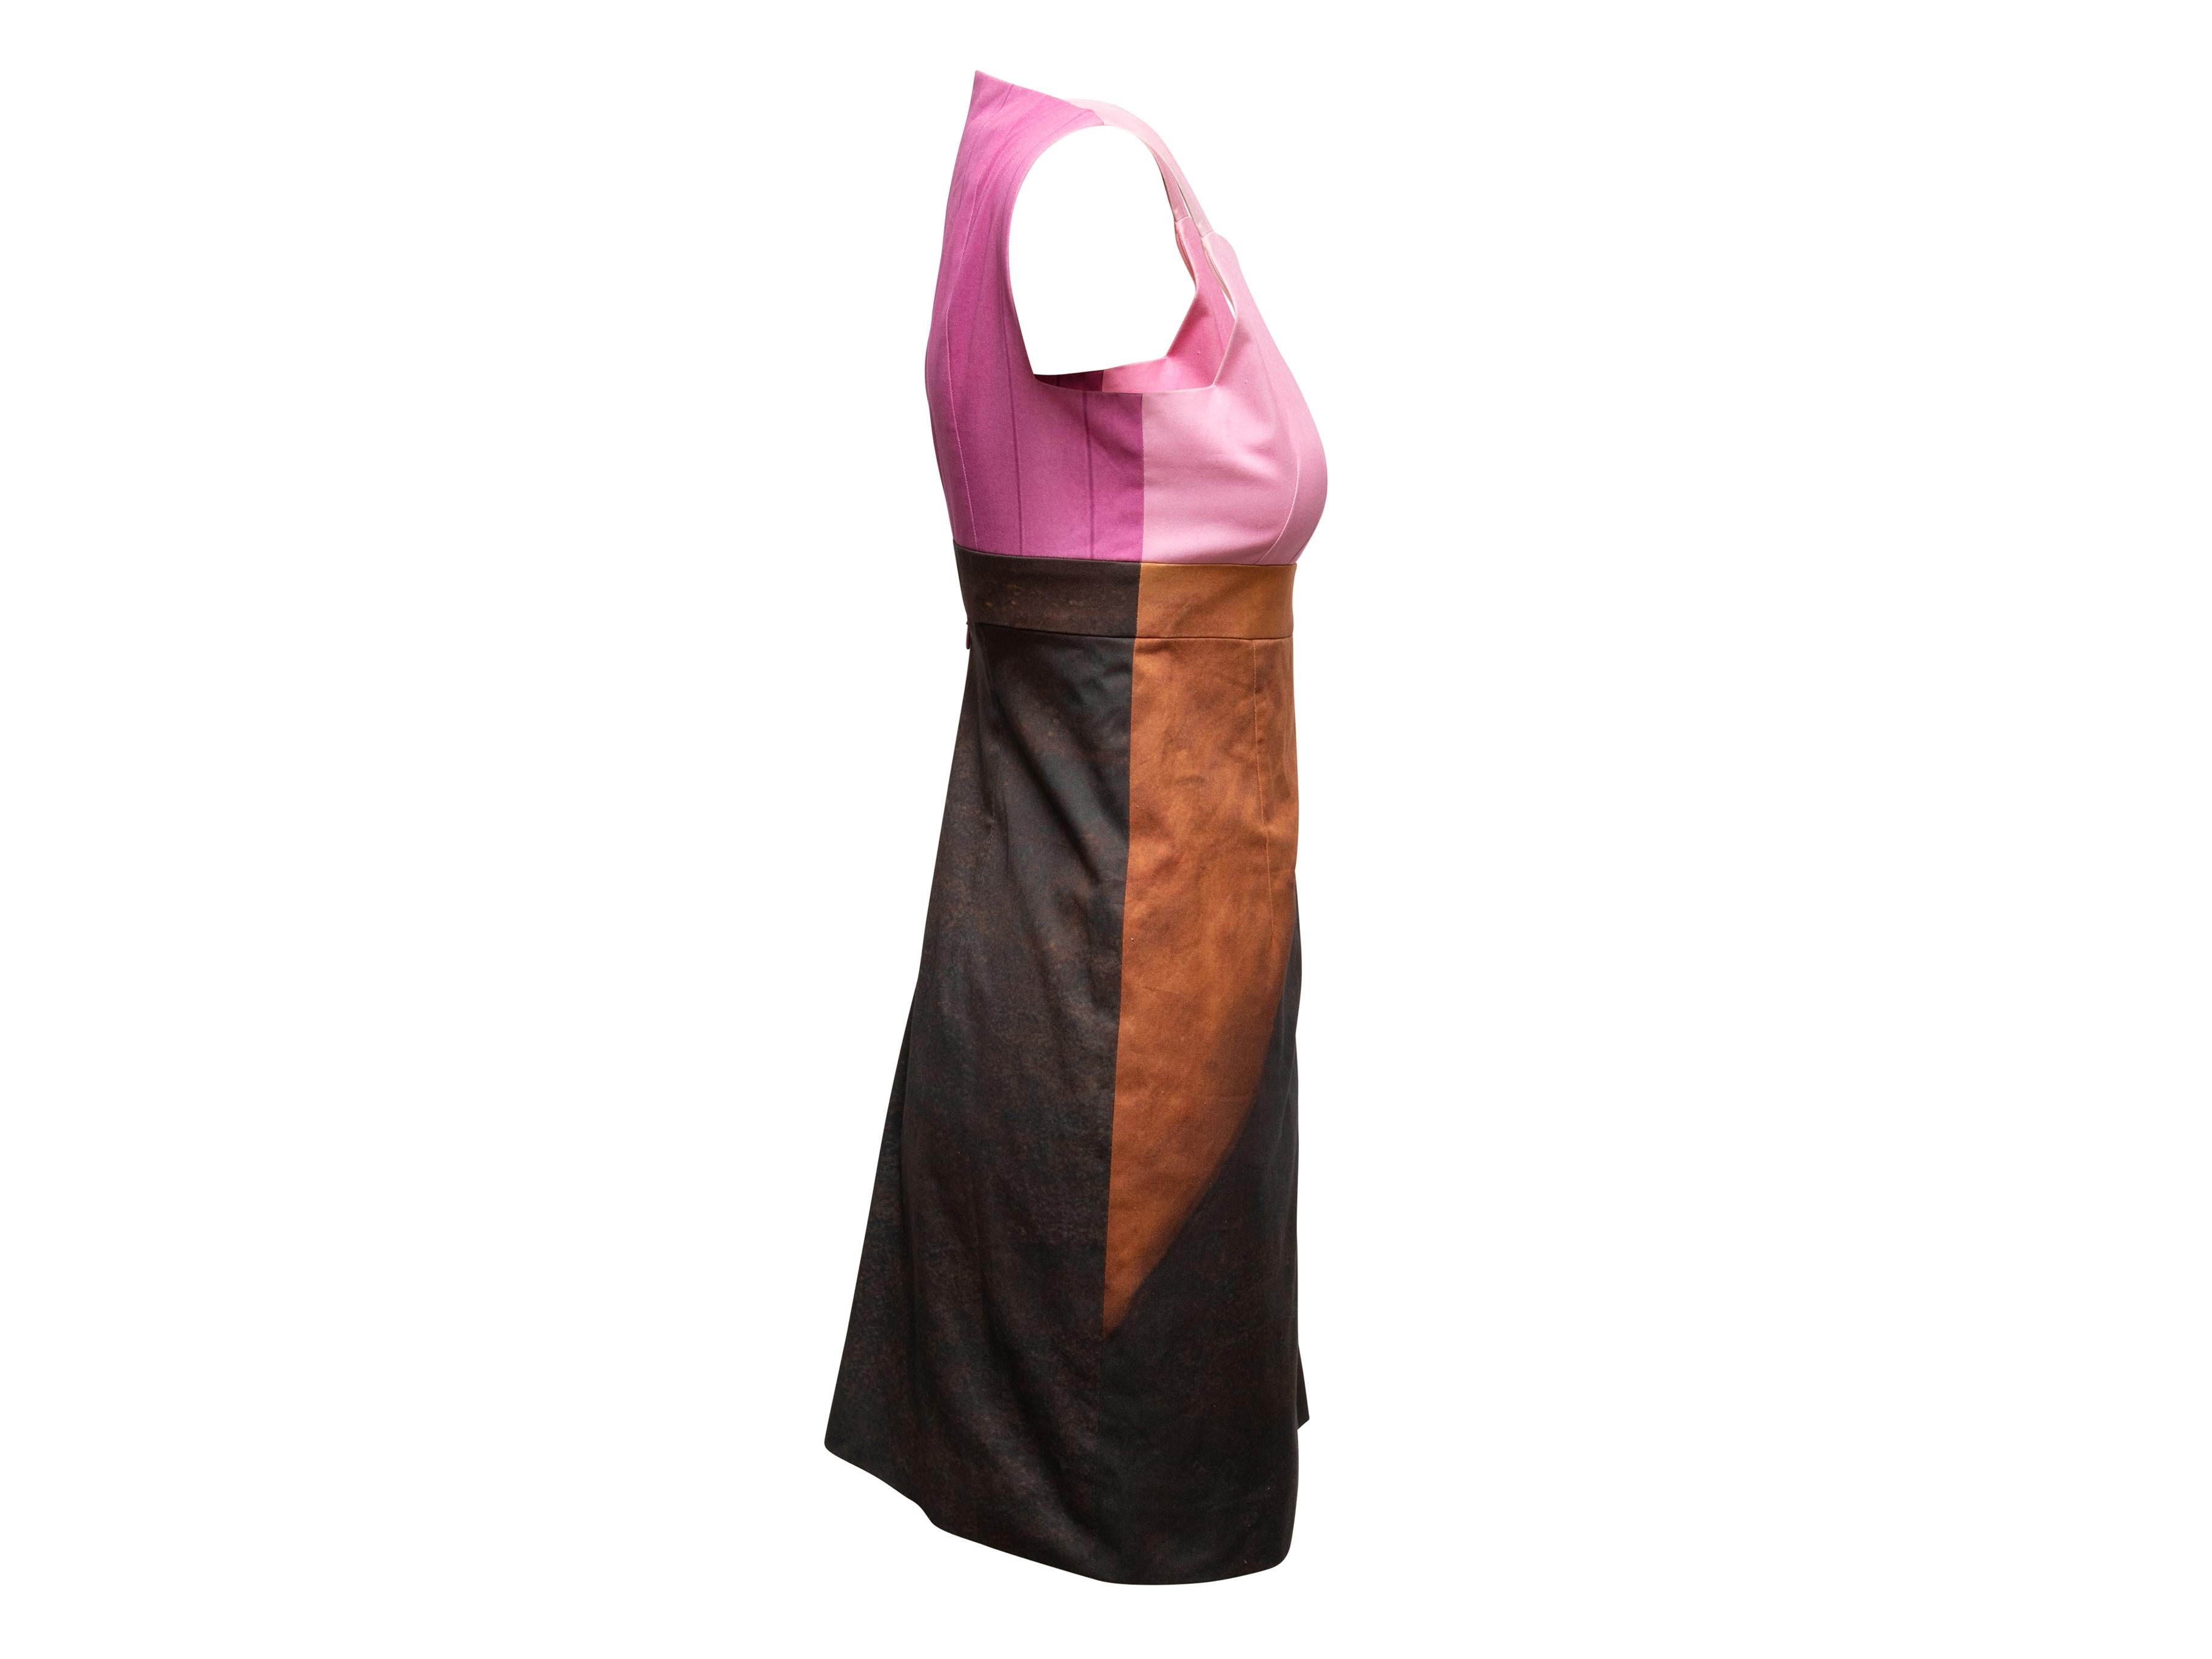 Pink and brown sleeveless color block dress by Akris. Square neckline. Zip closure at center back. 28